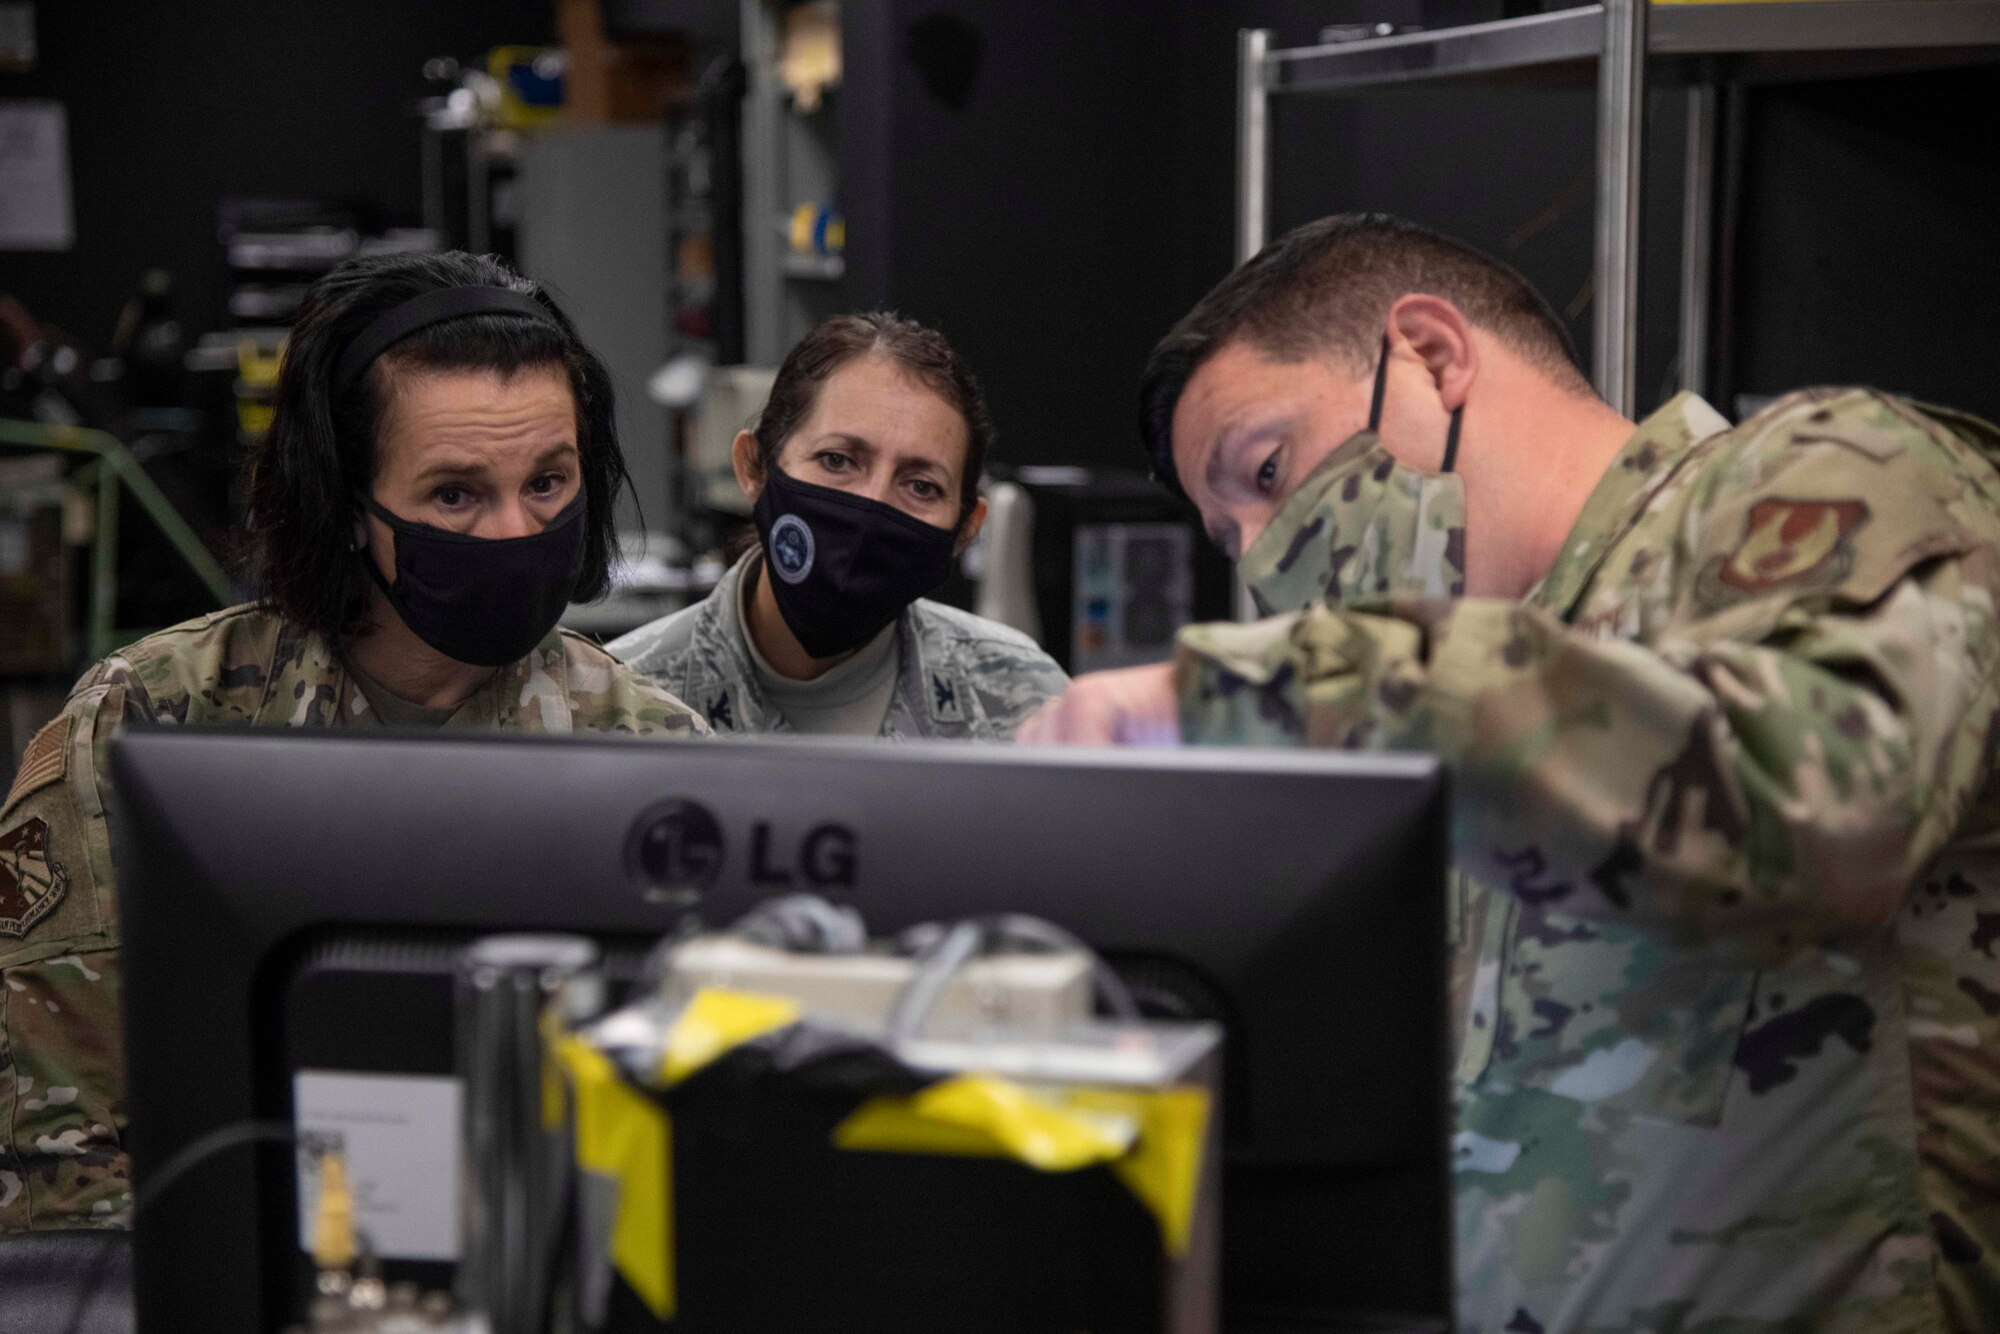 U.S. Air Force Brig. Gen. Jeannine M. Ryder (left), Commander, 711th Human Performance Wing, and her staff observe a screen during a presentation by U.S. Air Force Maj. Frank Echeverria (right) from the 711th Human Performance Wing, during a tour of the Tri-services Research Laboratory (TSRL) on Joint Base San Antonio Fort Sam Houston, Texas, Nov. 5, 2020. The new 181,000-square-foot TSRL houses Navy, Air Force and Army research programs. (U.S. Air Force Photo by Jose A. Torres Jr.)